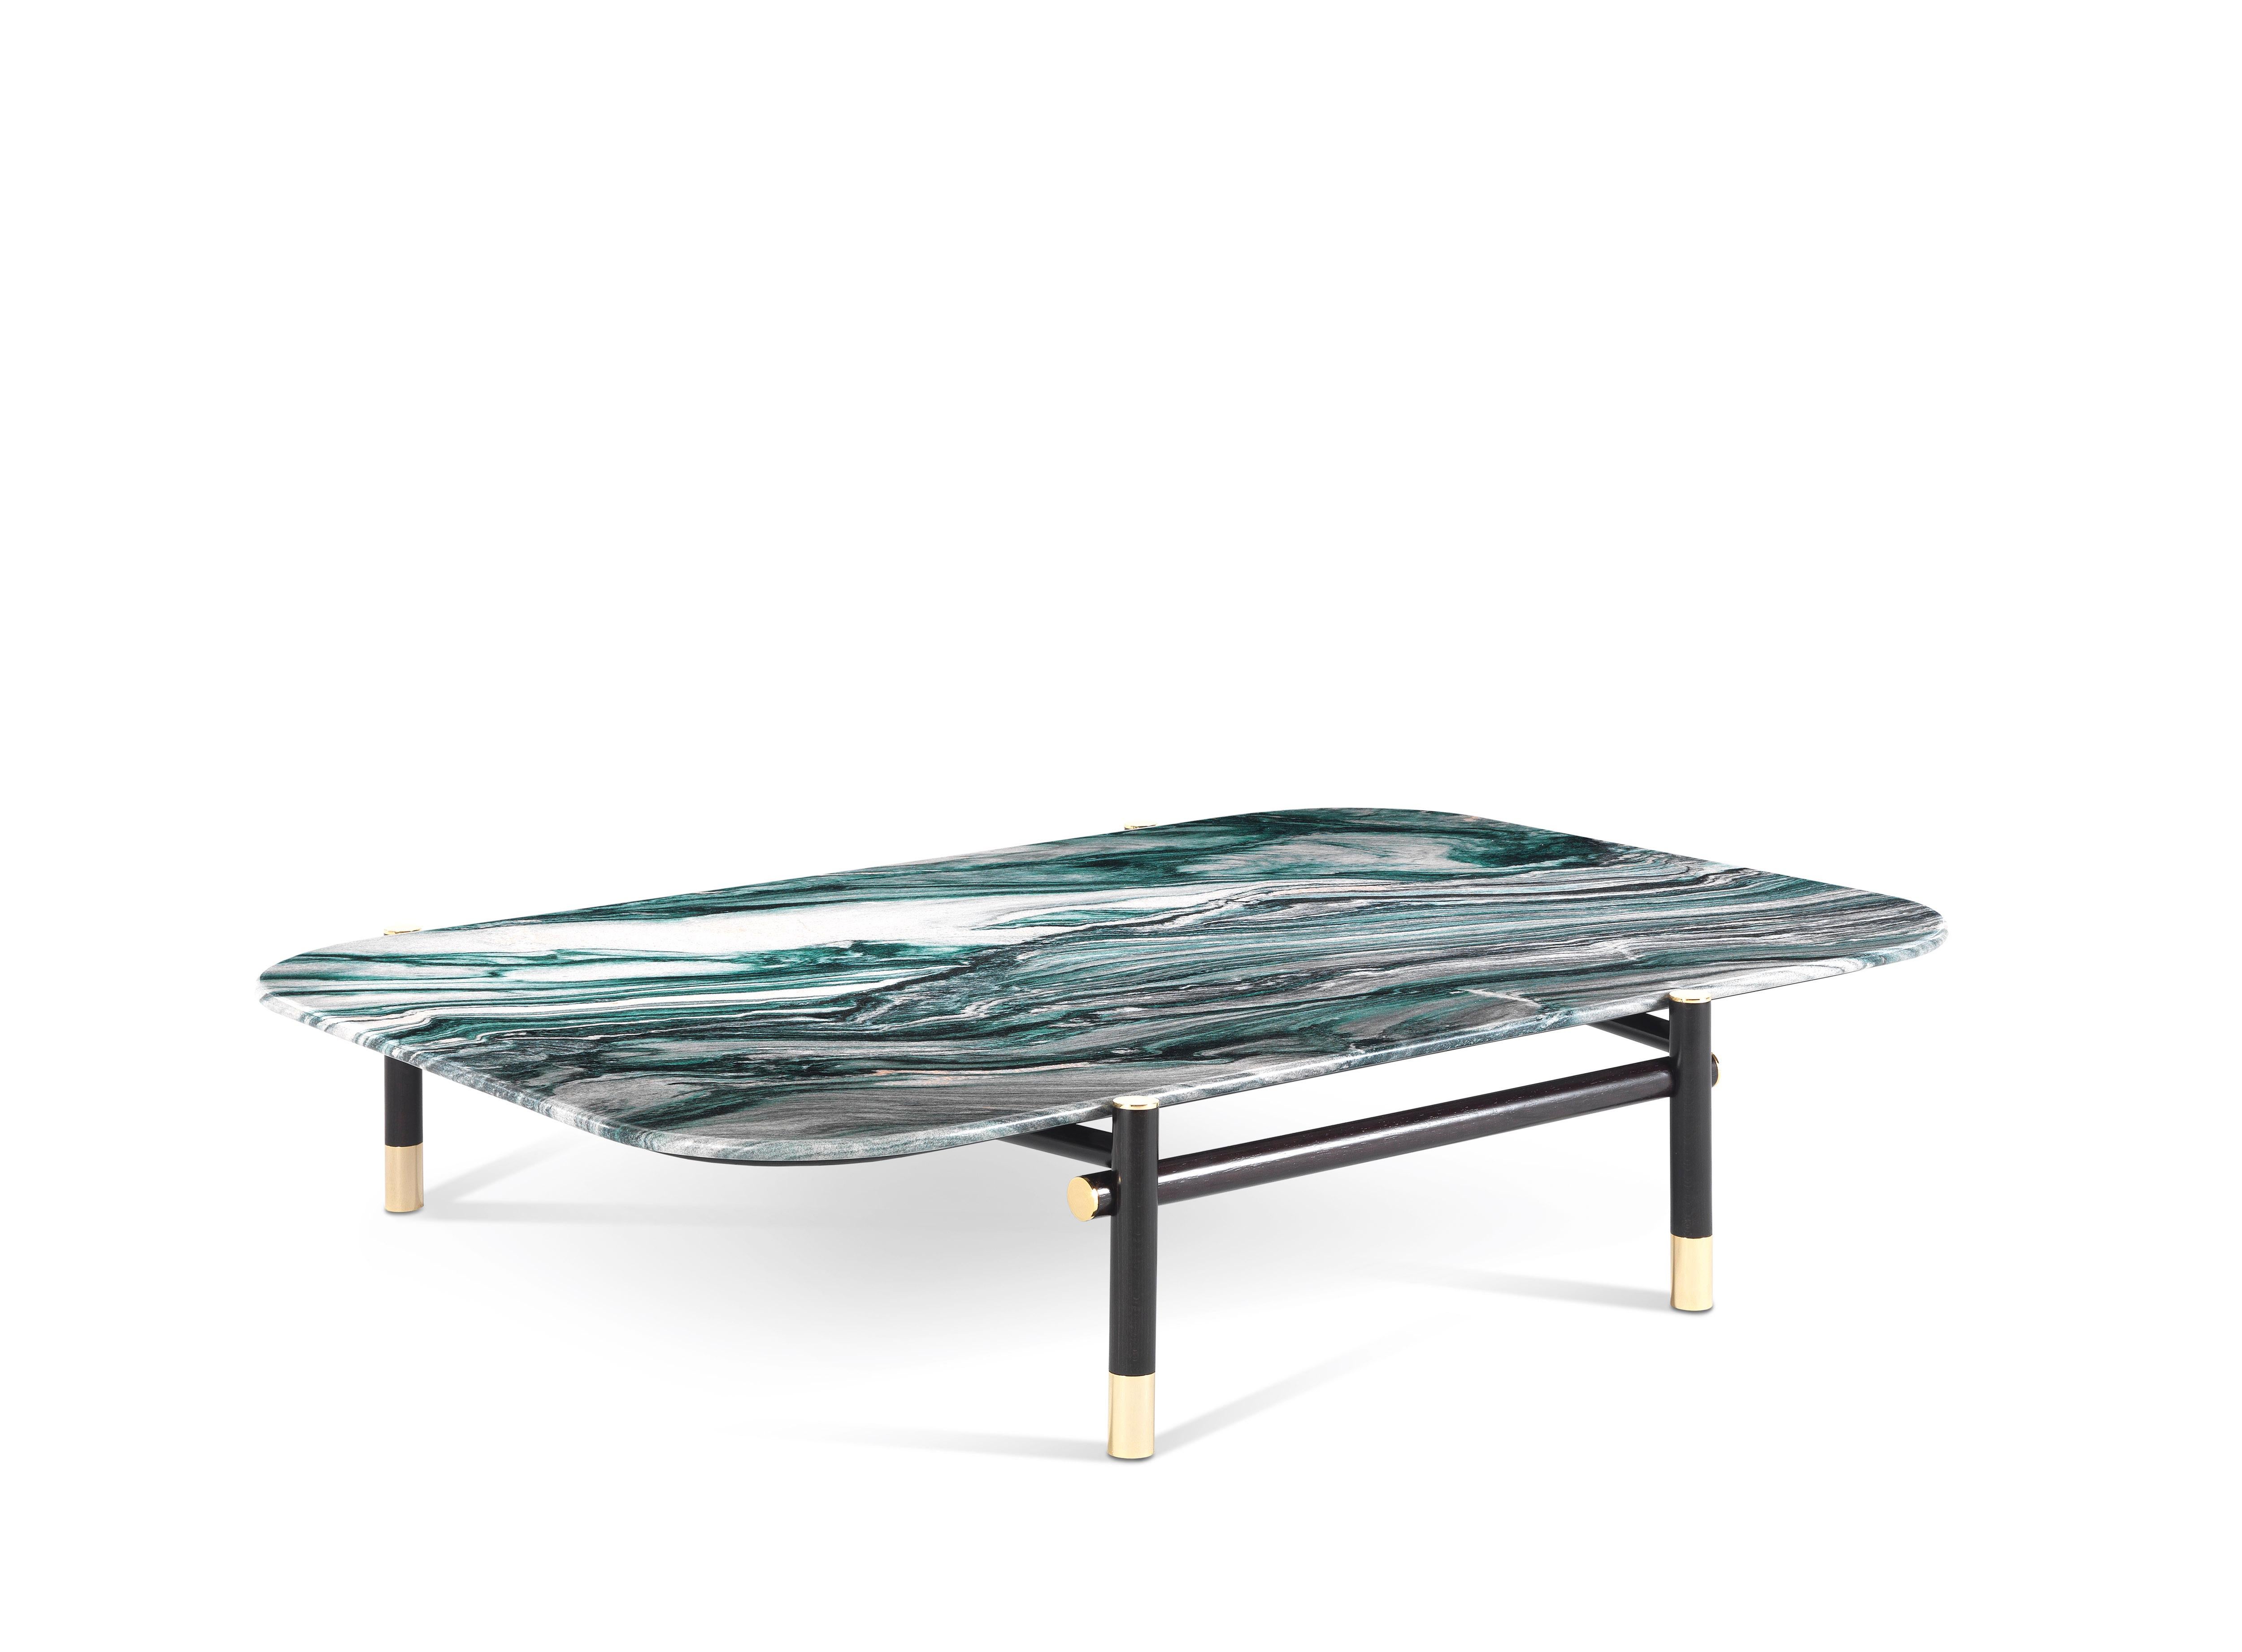 A central table with a precious appeal, featuring a special top in precious marble enhanced by refined details such as the polished brass tips of the basement. The table is a perfect expression of the extraordinary craftsmanship that characterizes